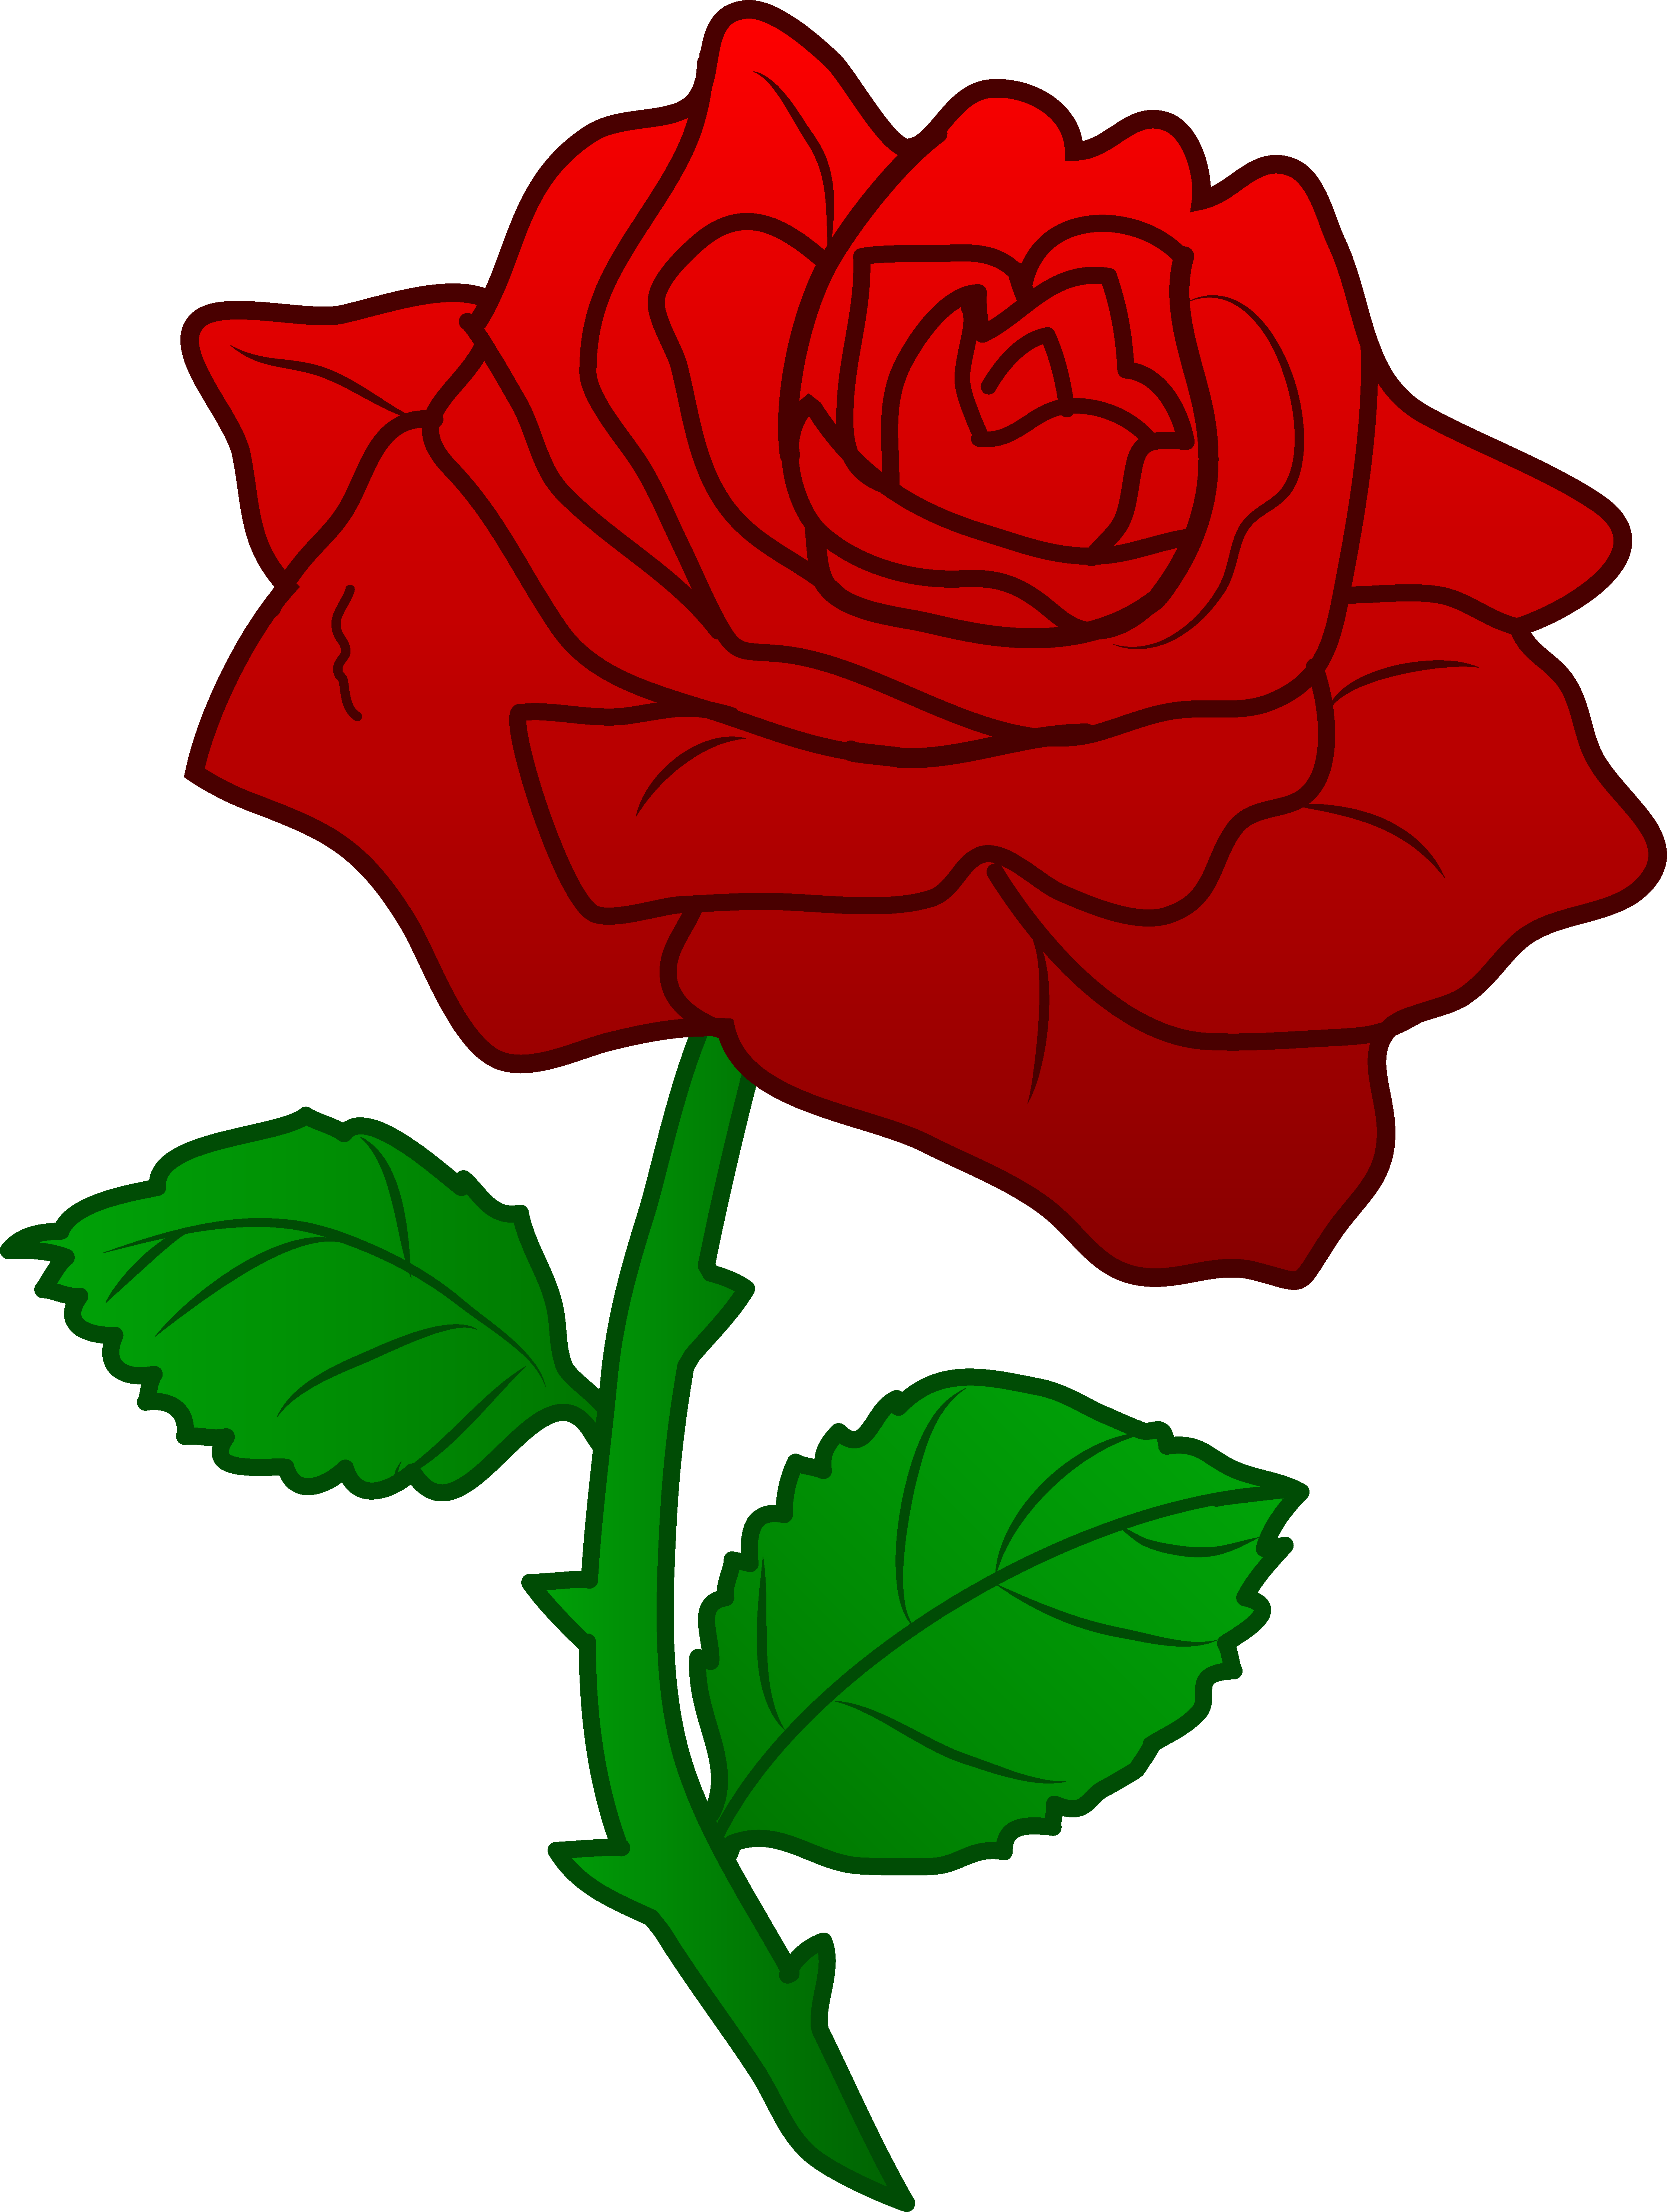 Roses Clipart Free Rose Image